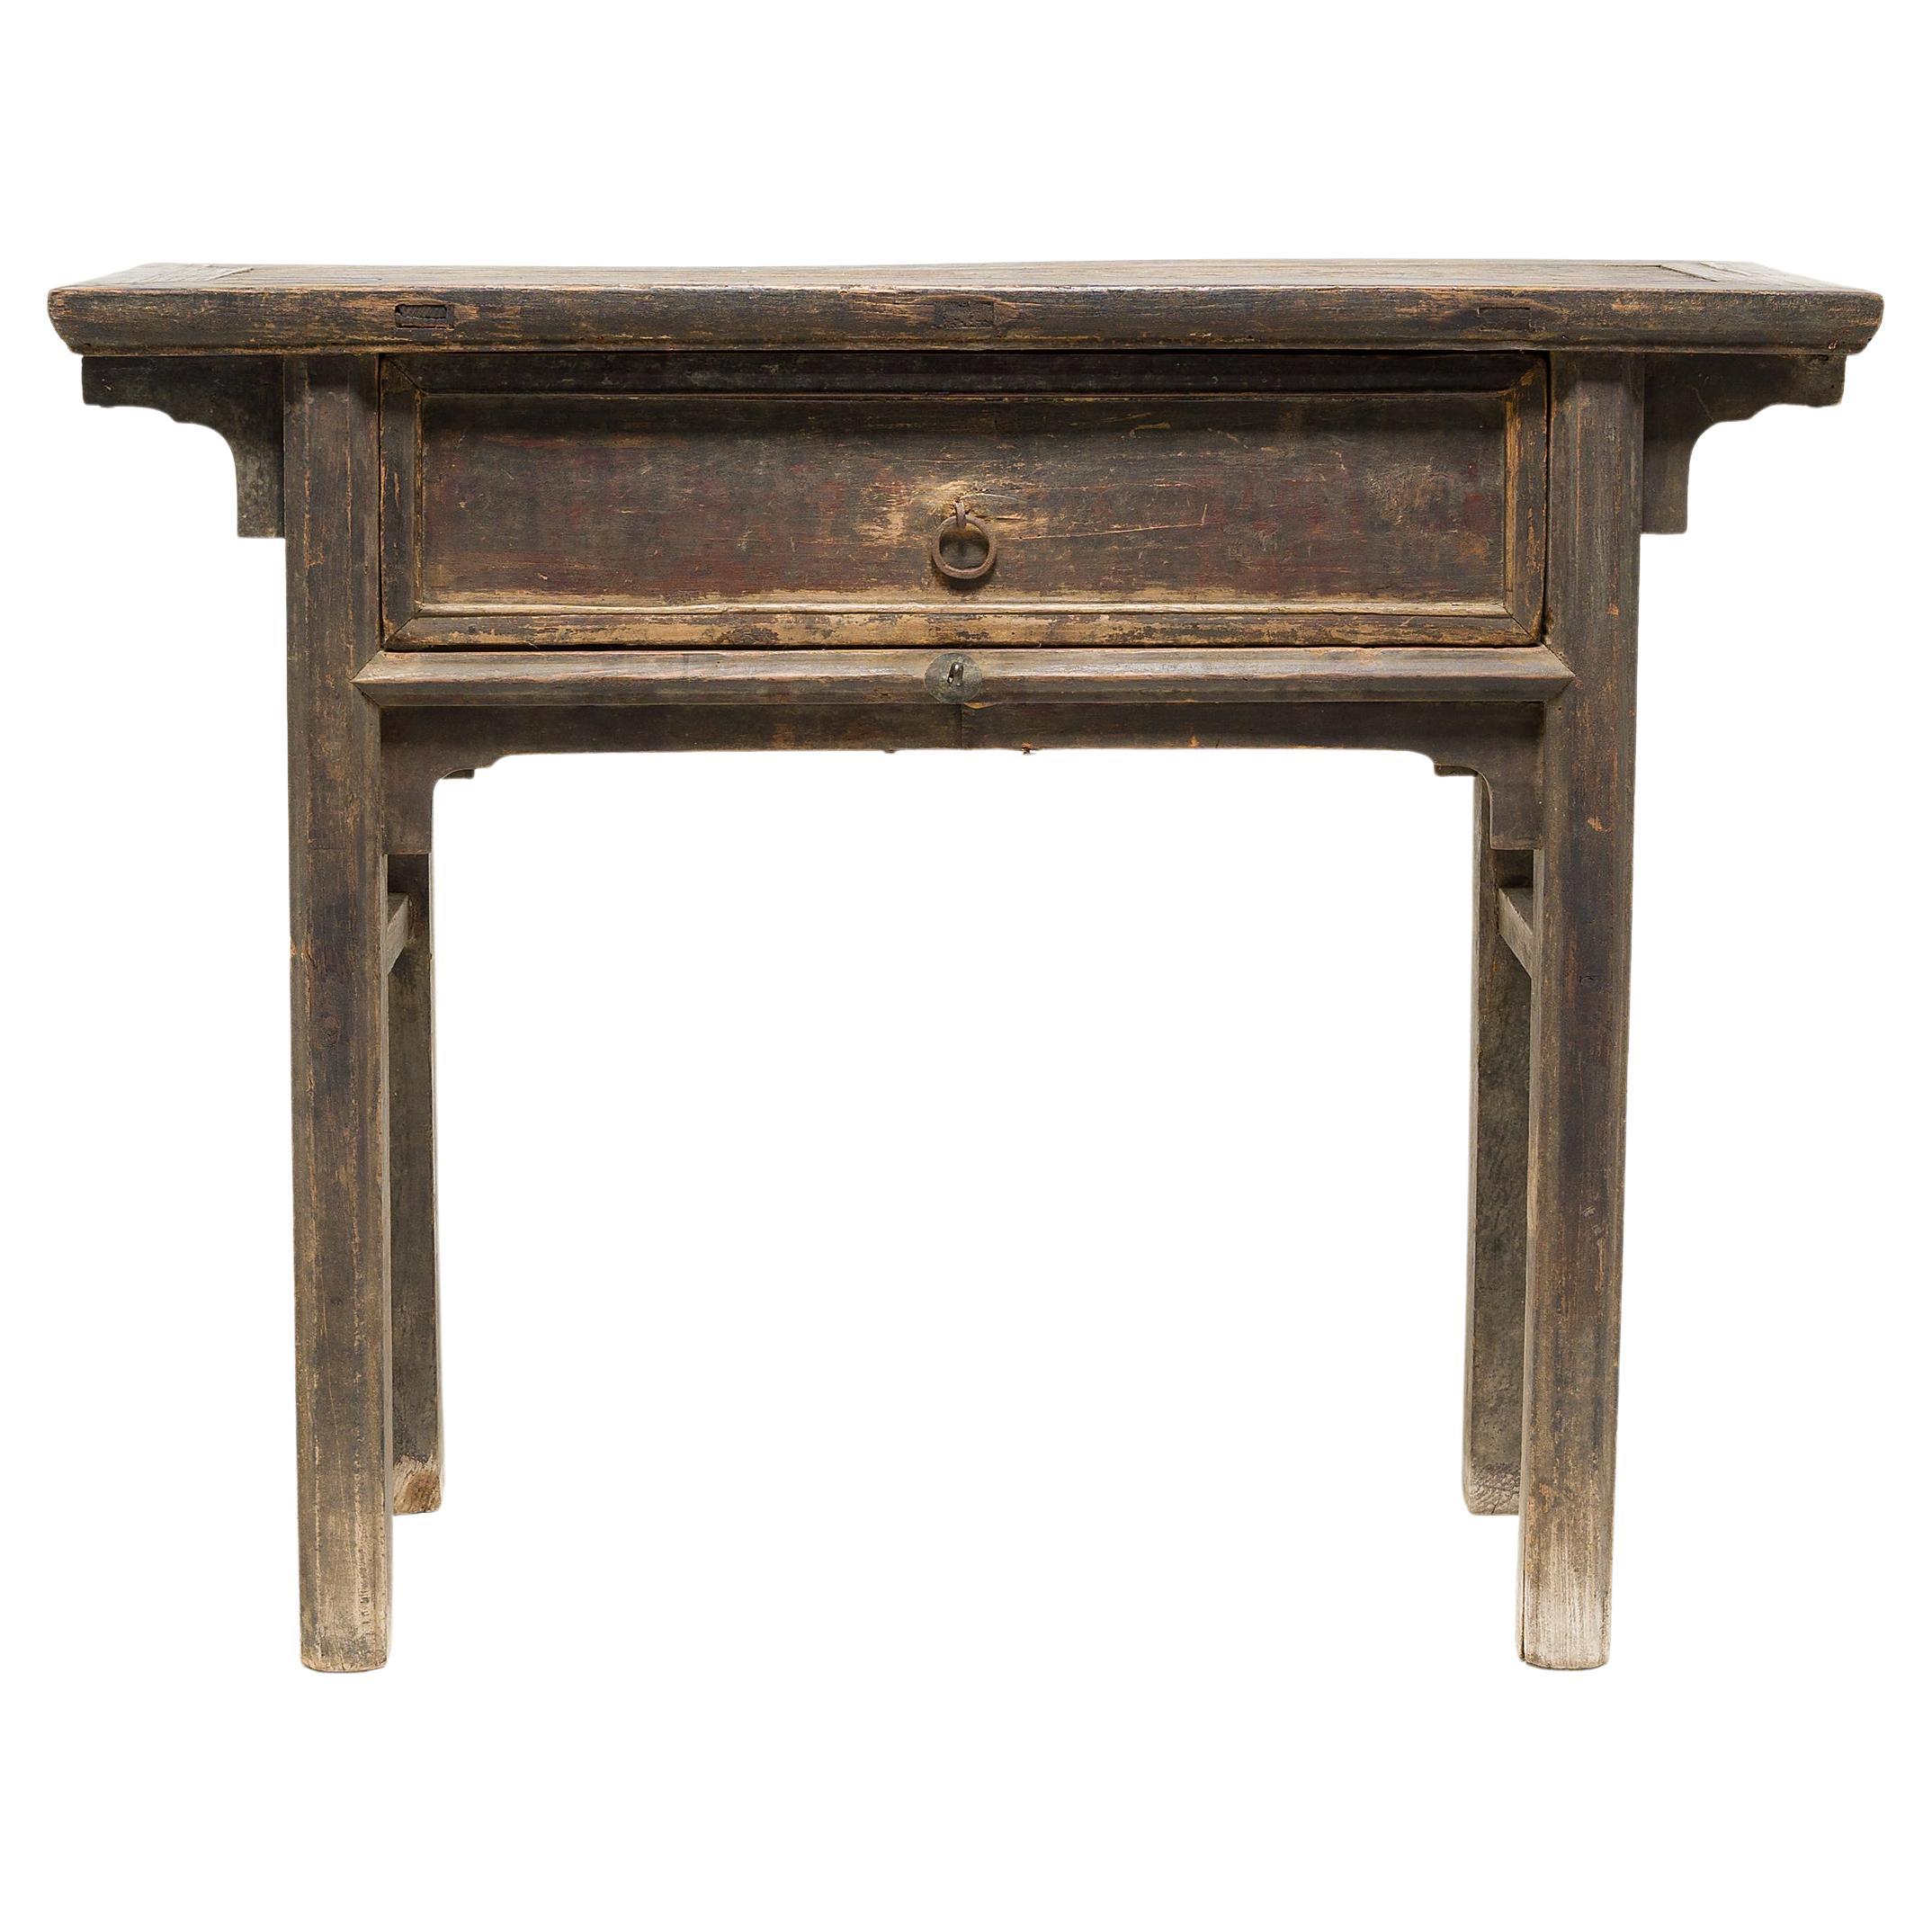 Chinese Shallow Offering Table, c. 1800